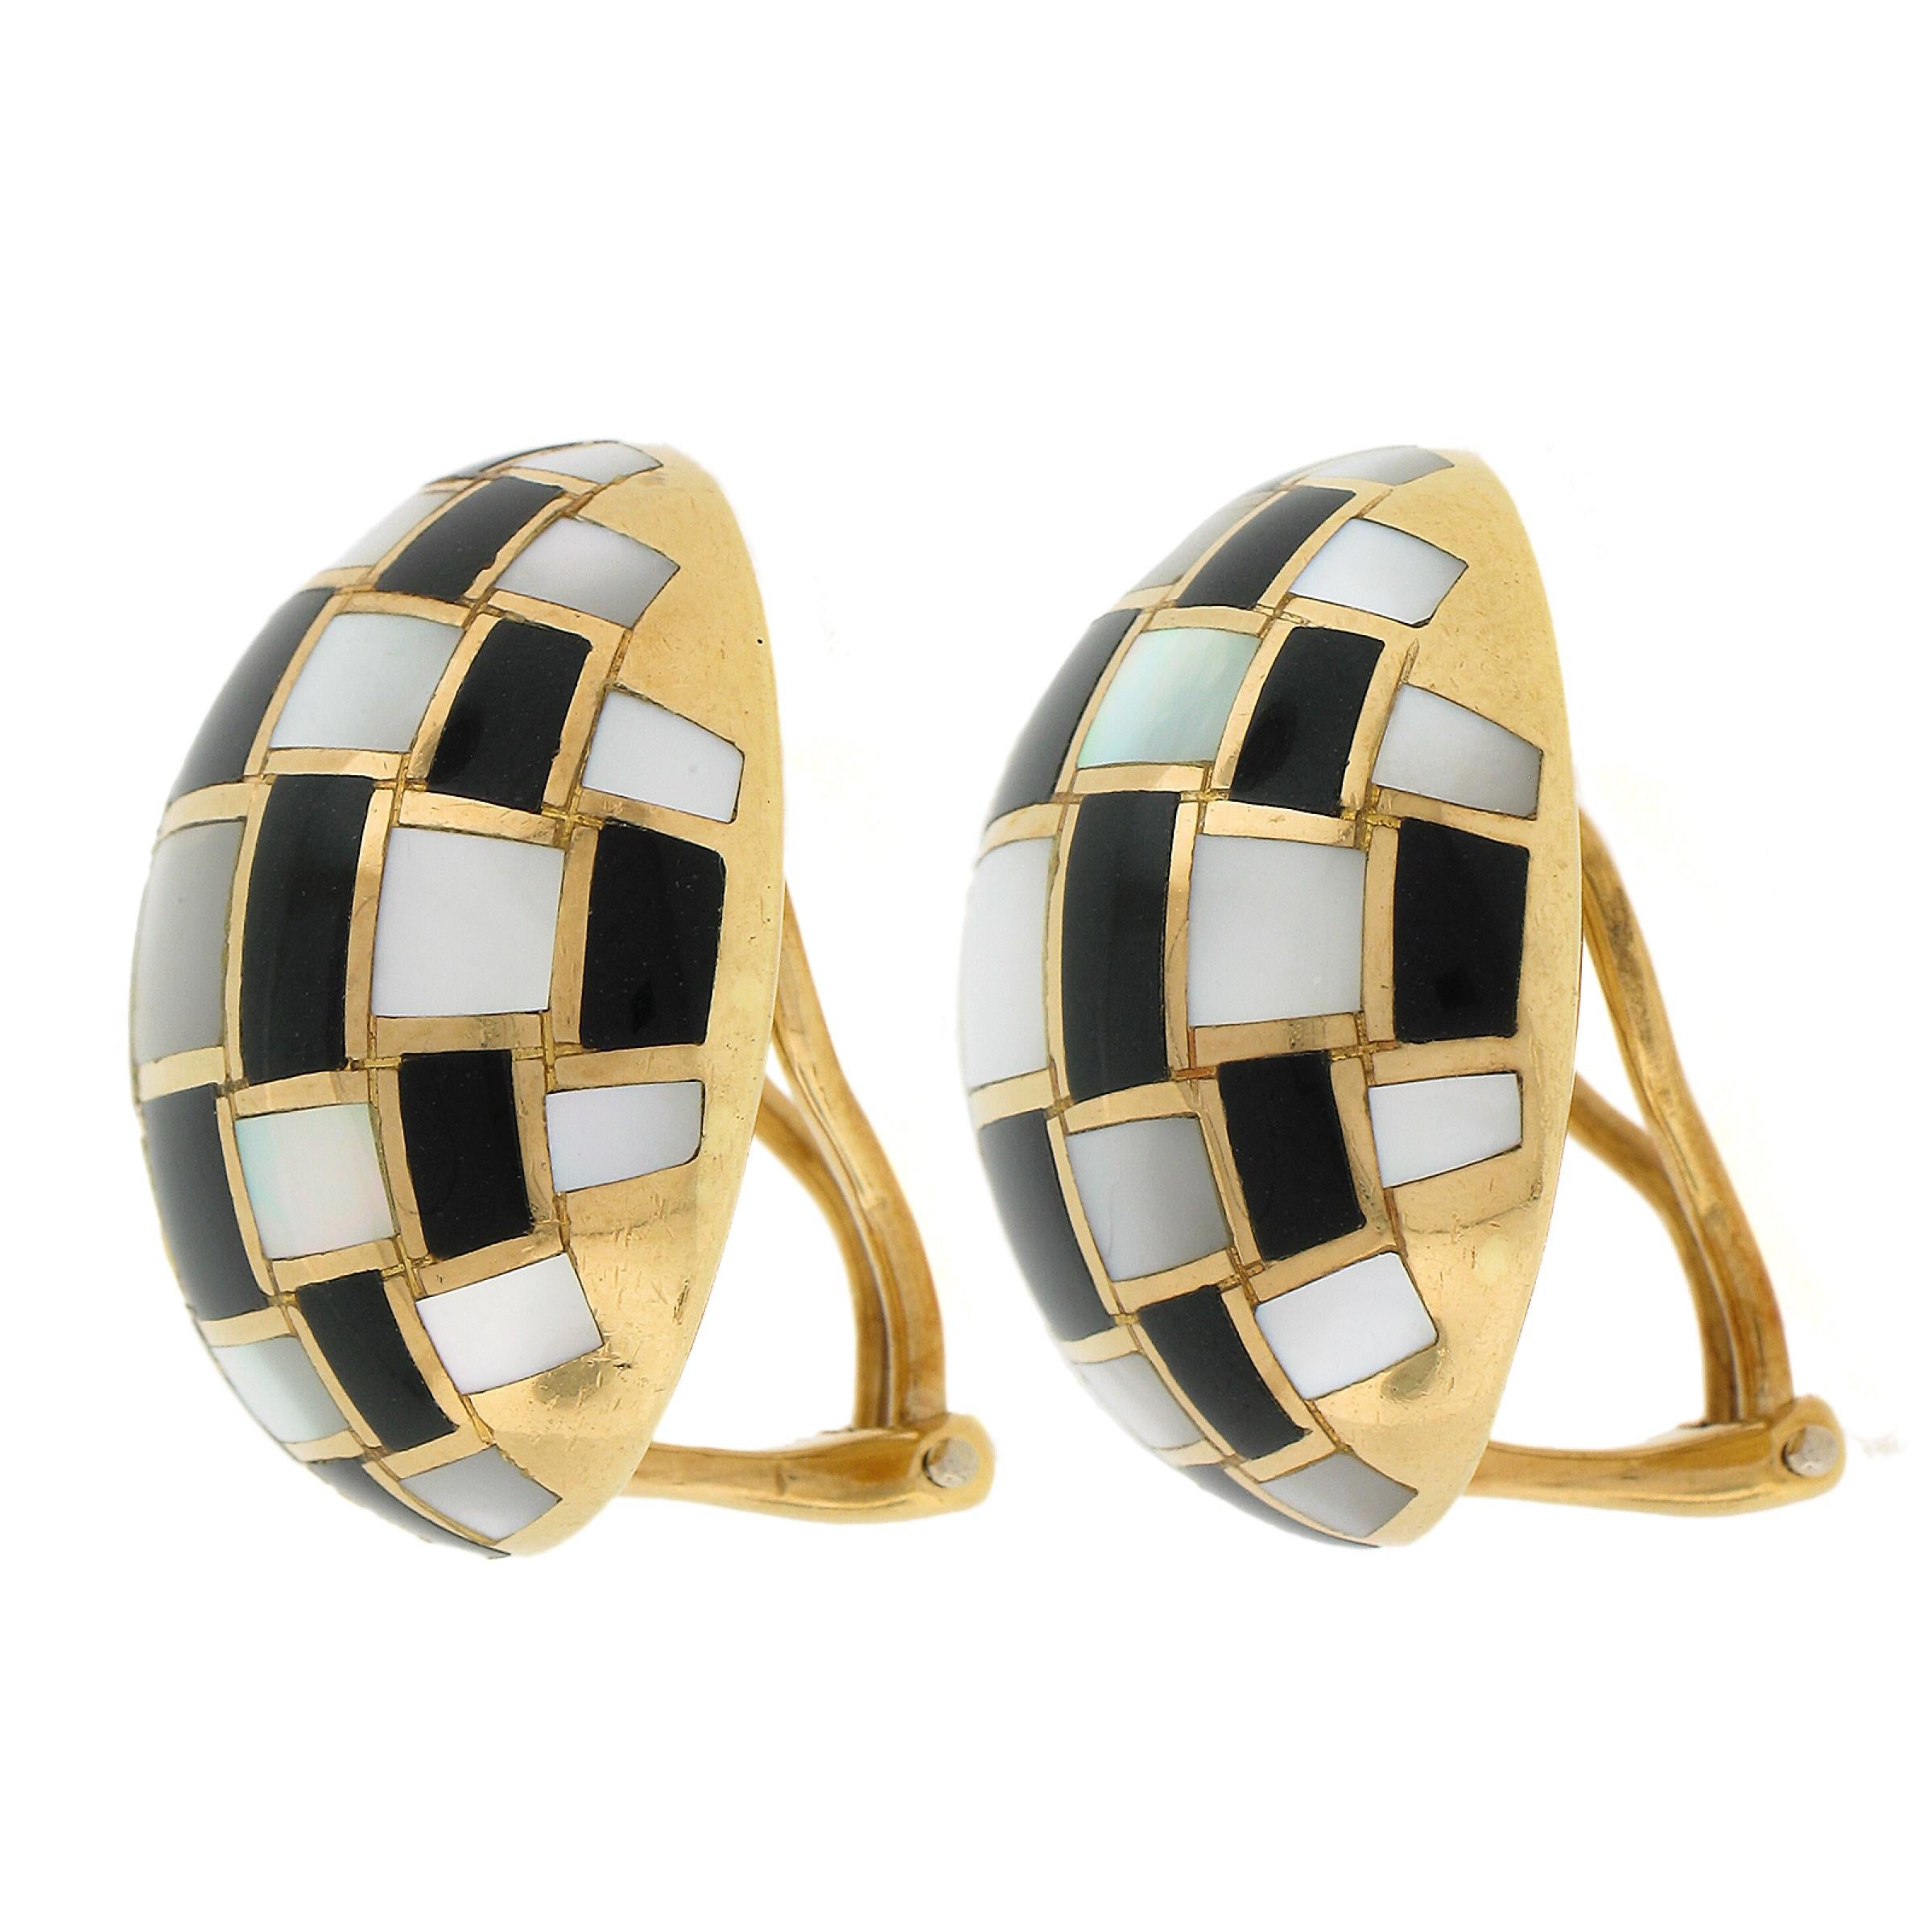 Tiffany & Co. 18k Gold Inlaid Black Onyx & Mother of Pearl Checkerboard Earrings In Good Condition For Sale In Montclair, NJ